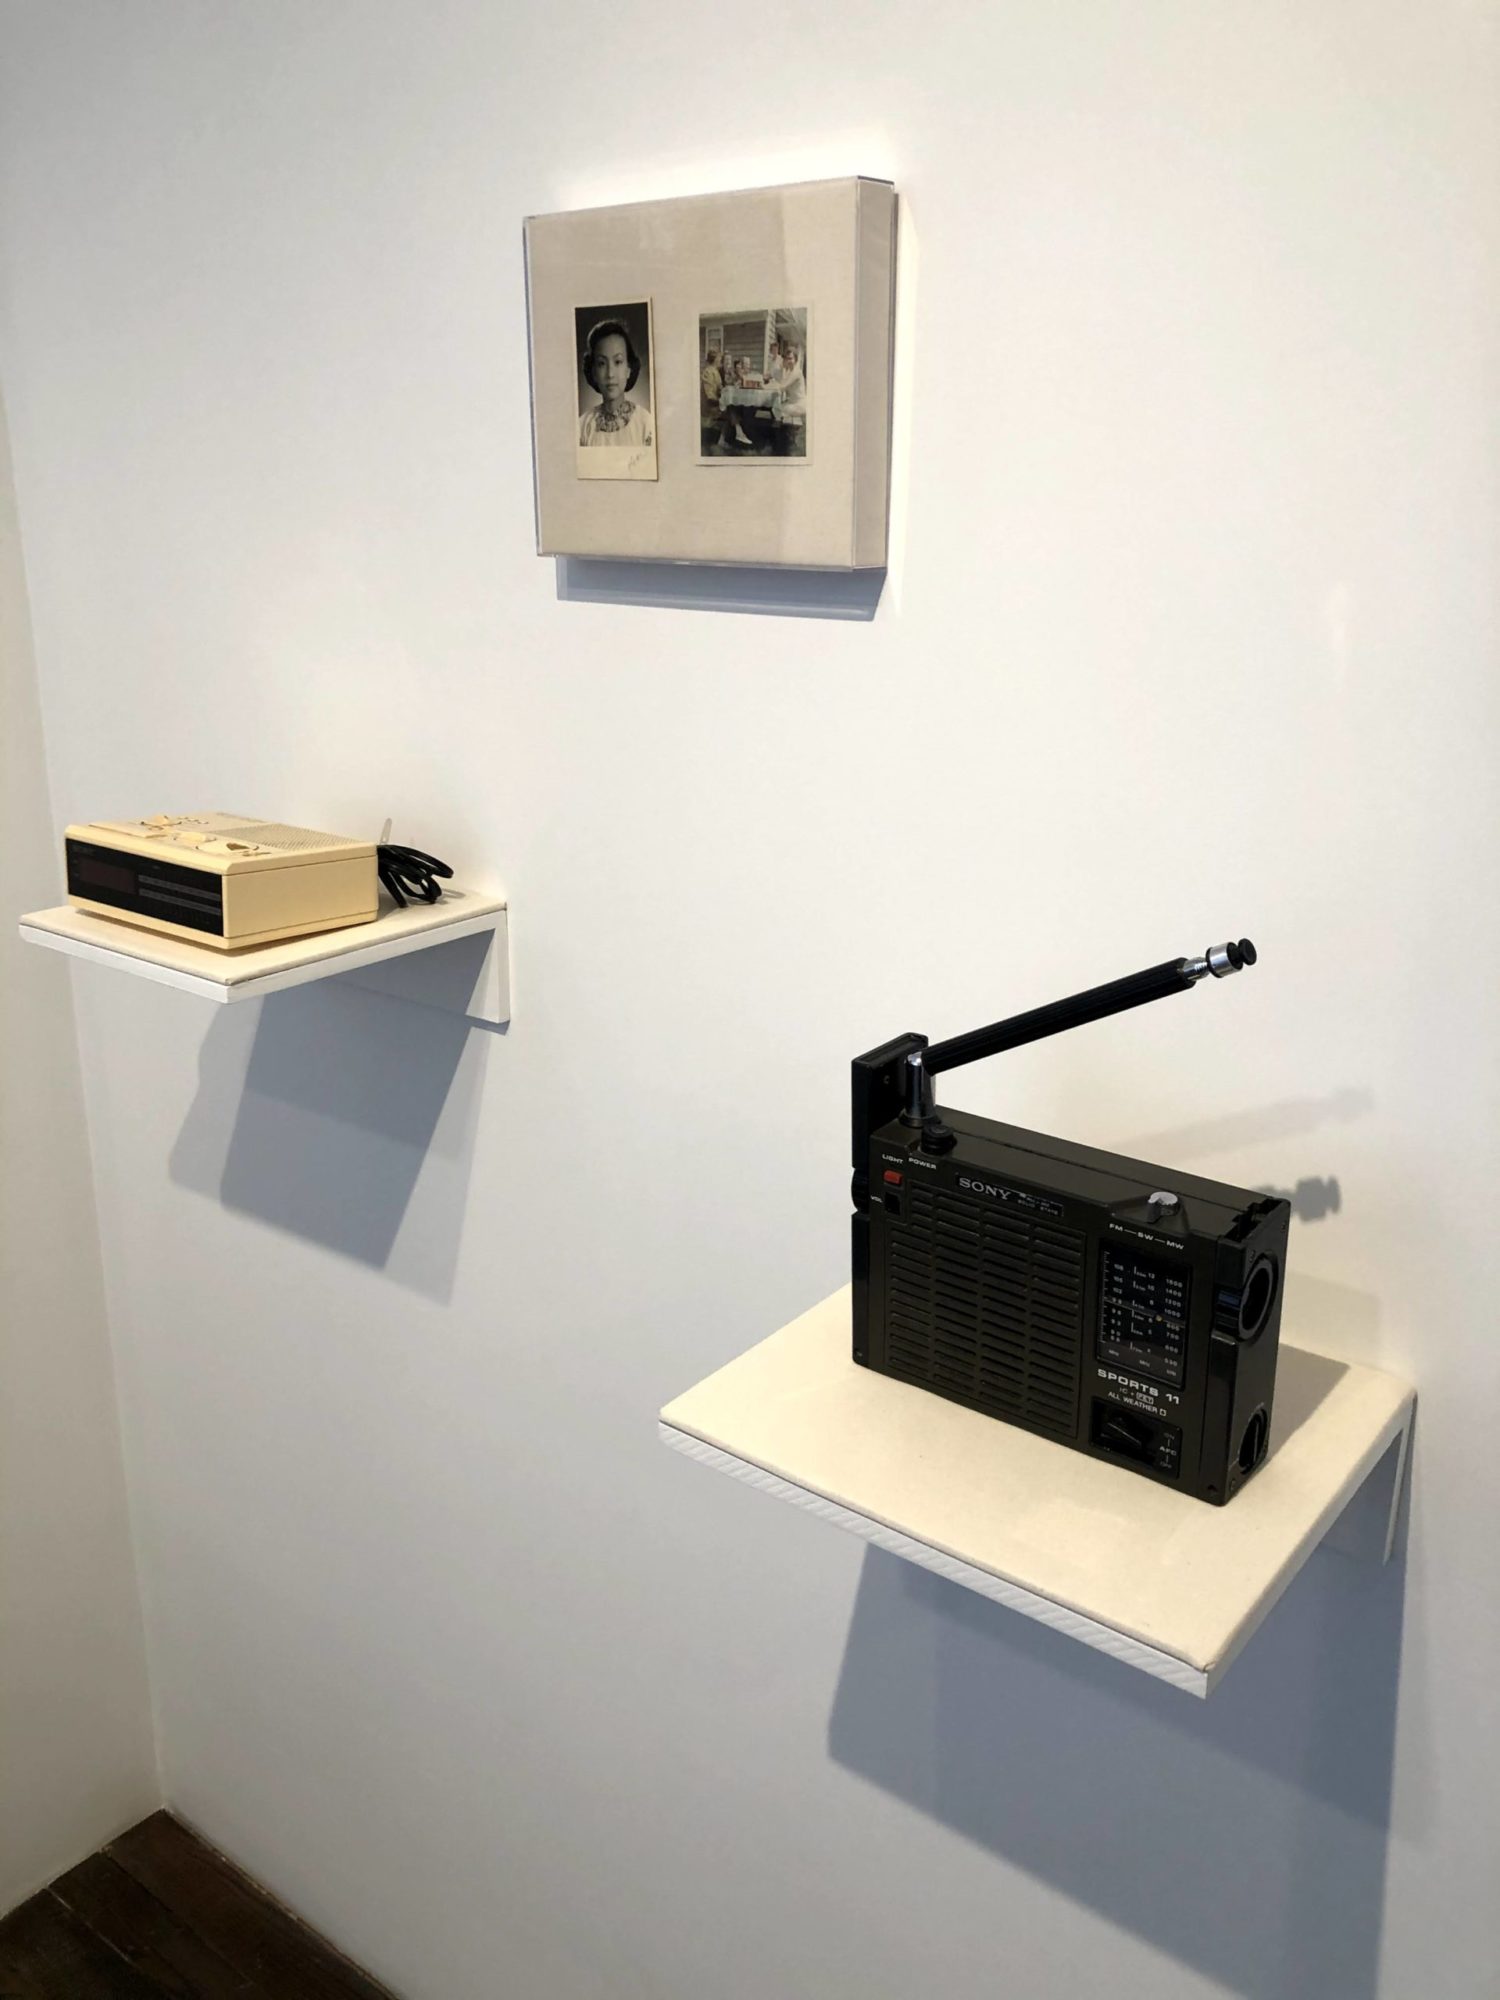 An angled installation shot. There are two square, floating shelves at staggered heights and two black and white images mounted together above. The floating shelves have antique radios on them; the higher shelf on the left featuring a small tan radio and the lower shelf on the right featuring a larger black radio with an antenna. The photo on the left above is a portrait and the photo on the right above is a group photo.